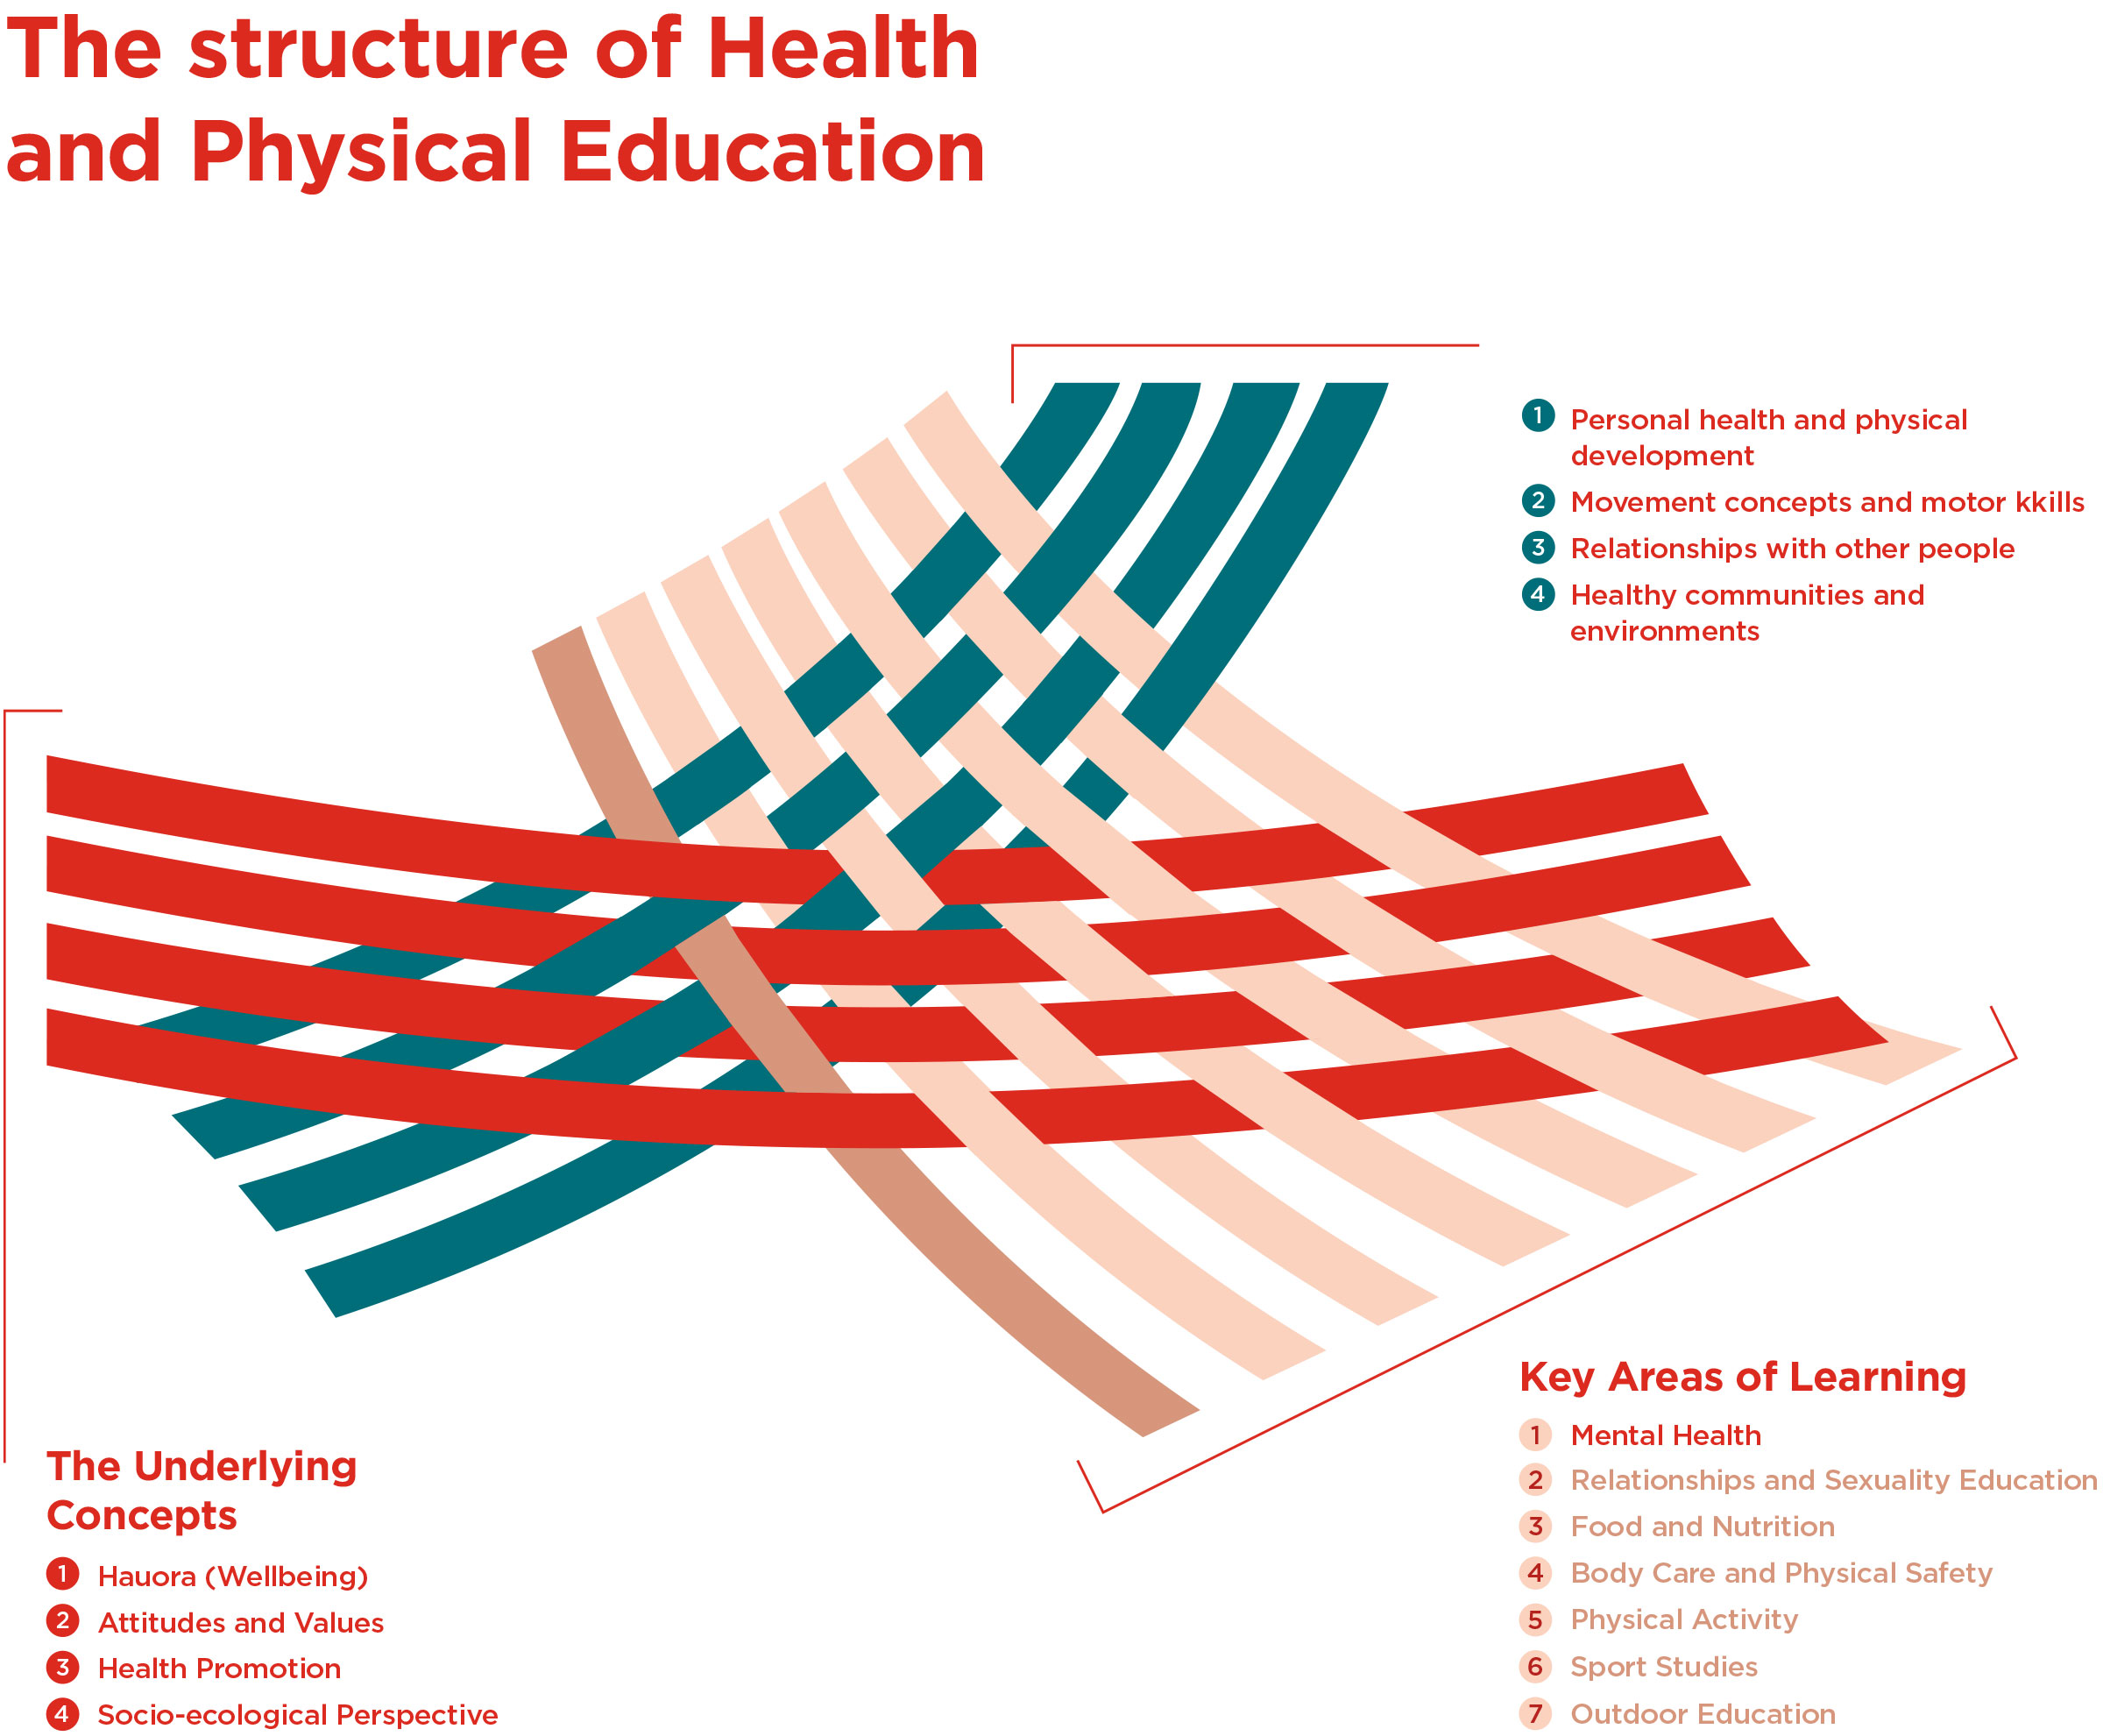 A diagram called The Structure of Health and Physical Education that illustrates how the underlying concepts and the key areas of learning weave together. The mental health key area has been highlighted.